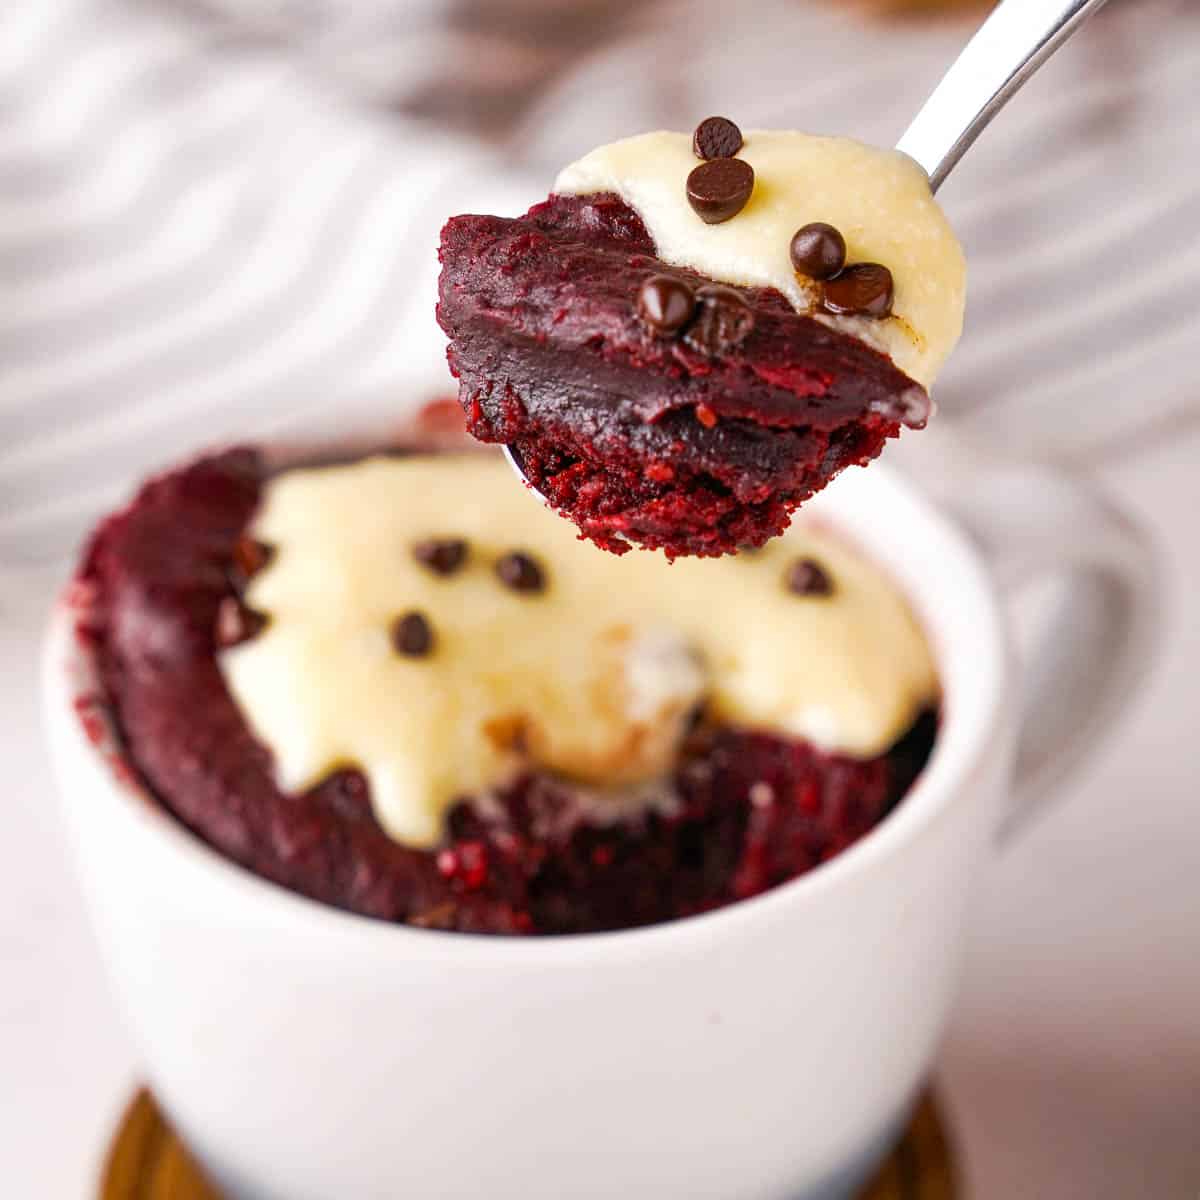 A spoonful of red velvet cake being taken out of a mug.